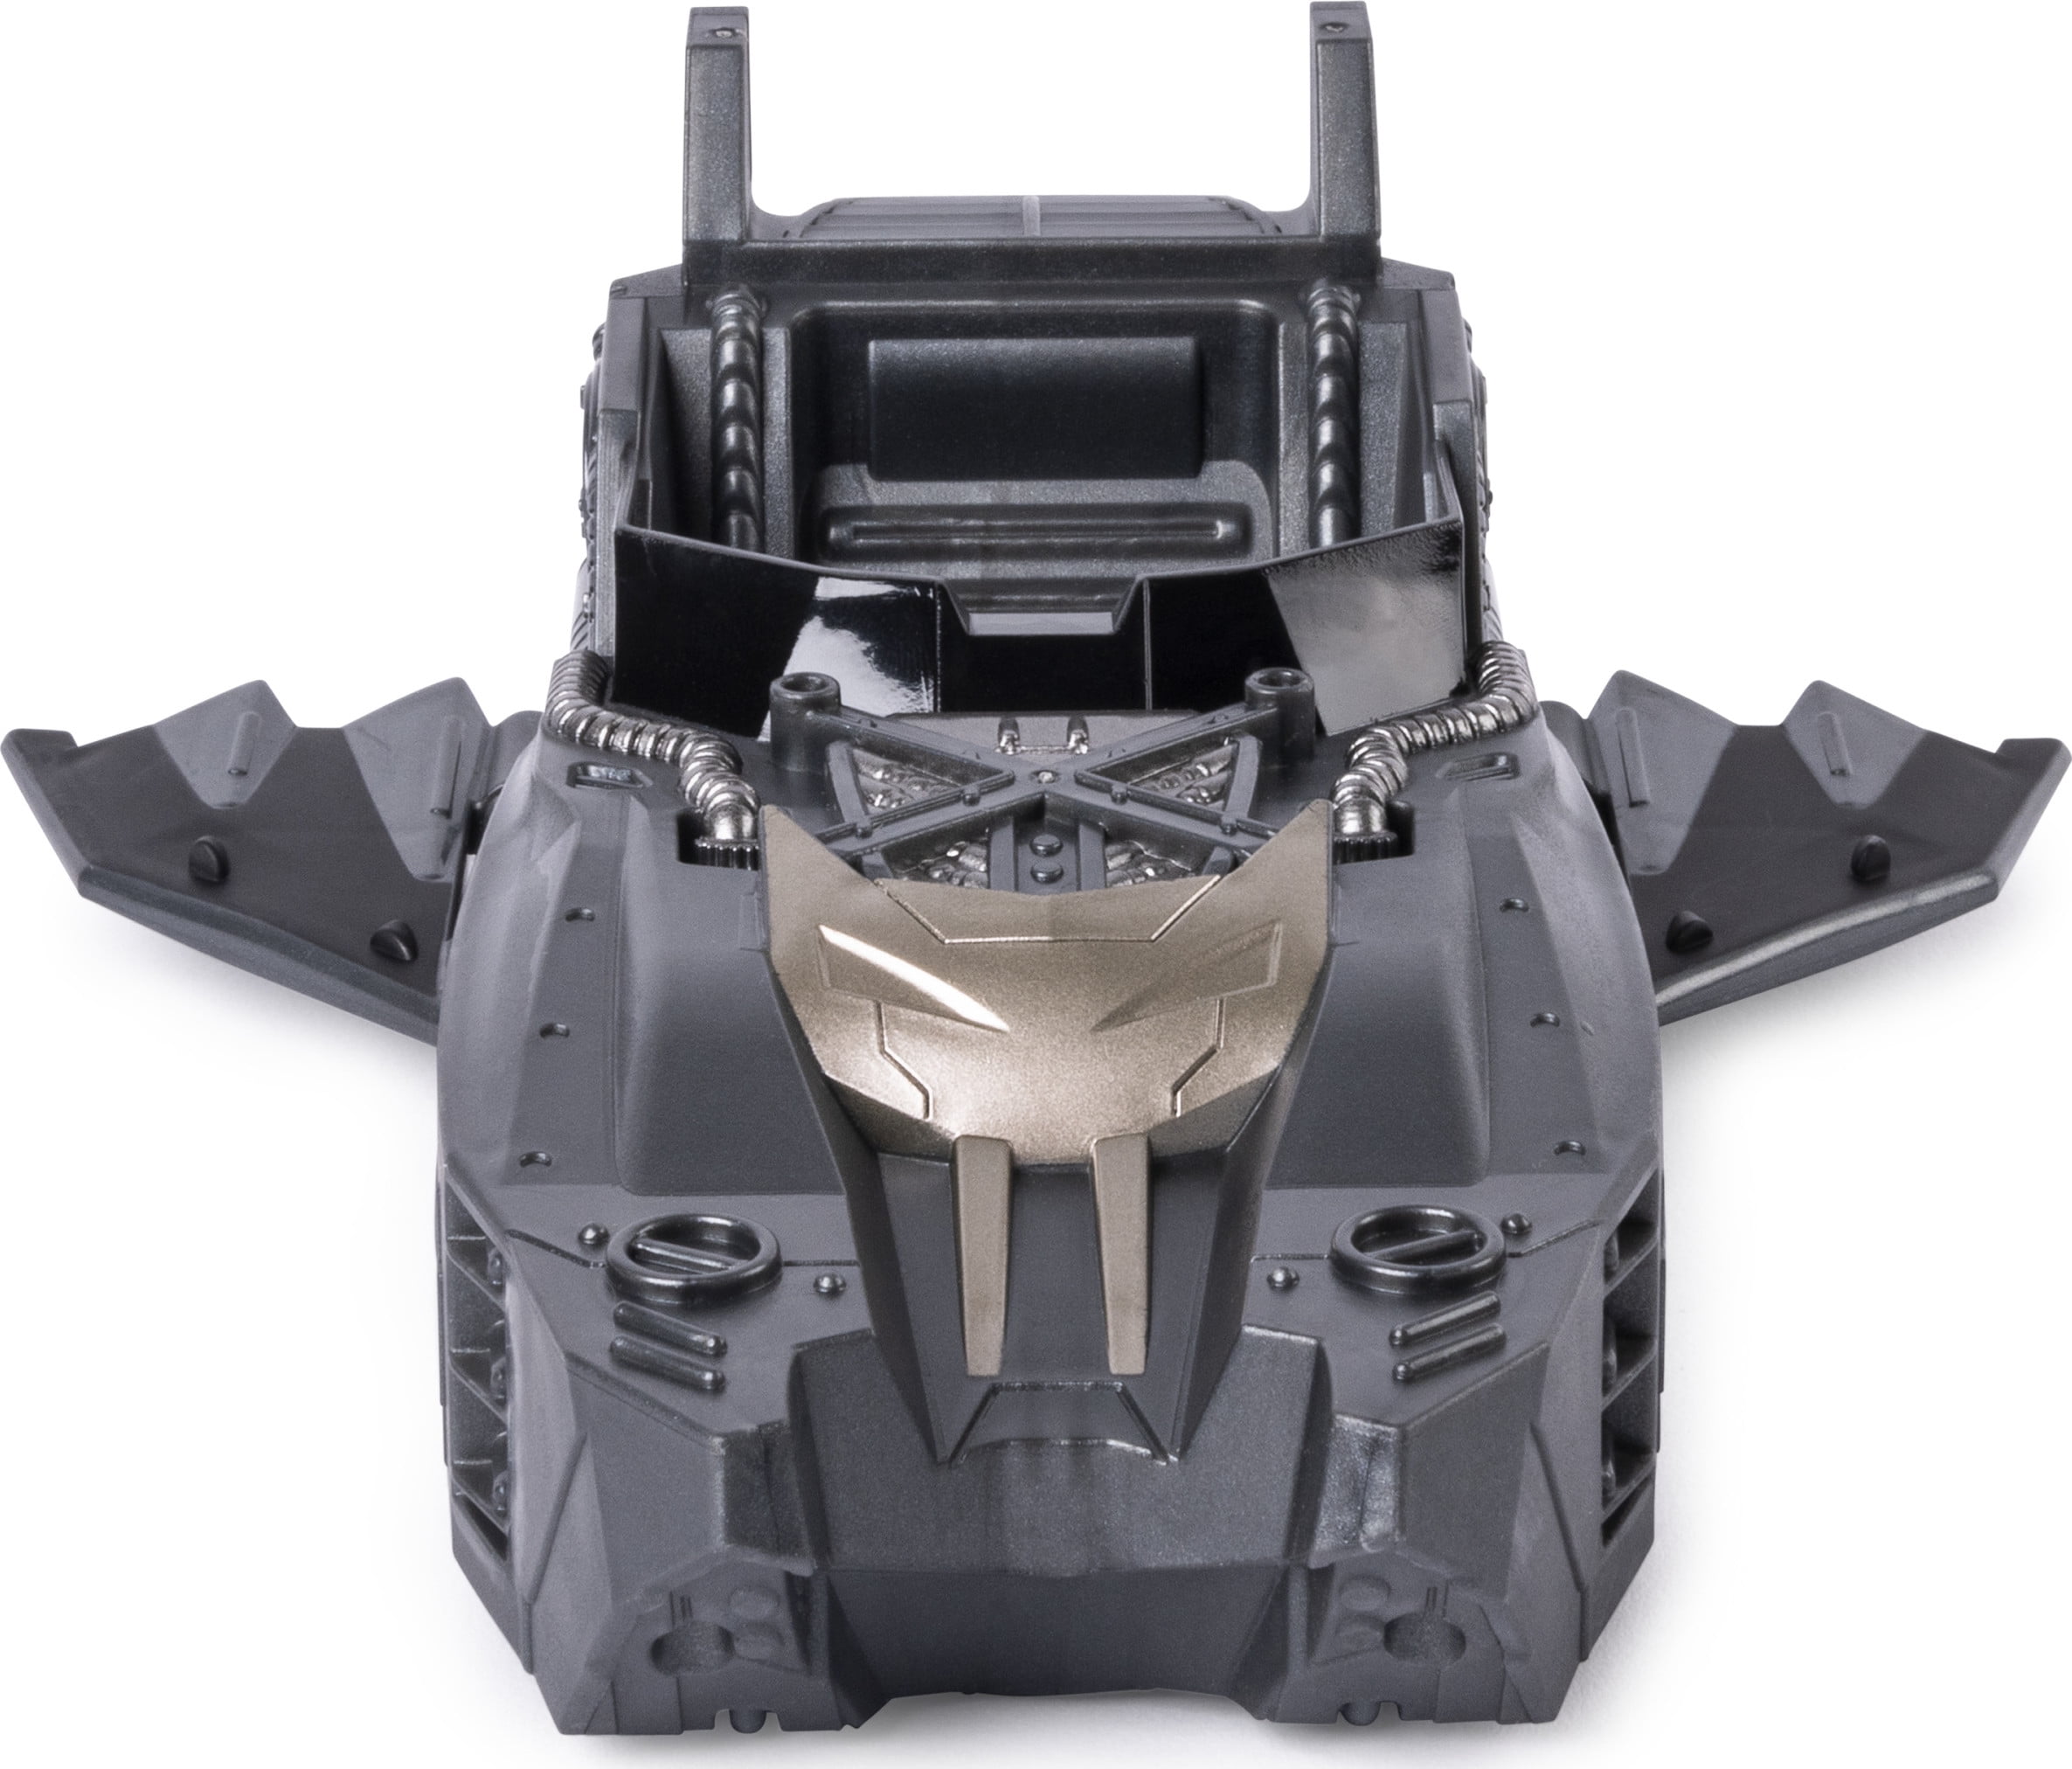 Batman Batmobile and Batboat 2-in-1 Transforming Vehicle 1st Edition for sale online 